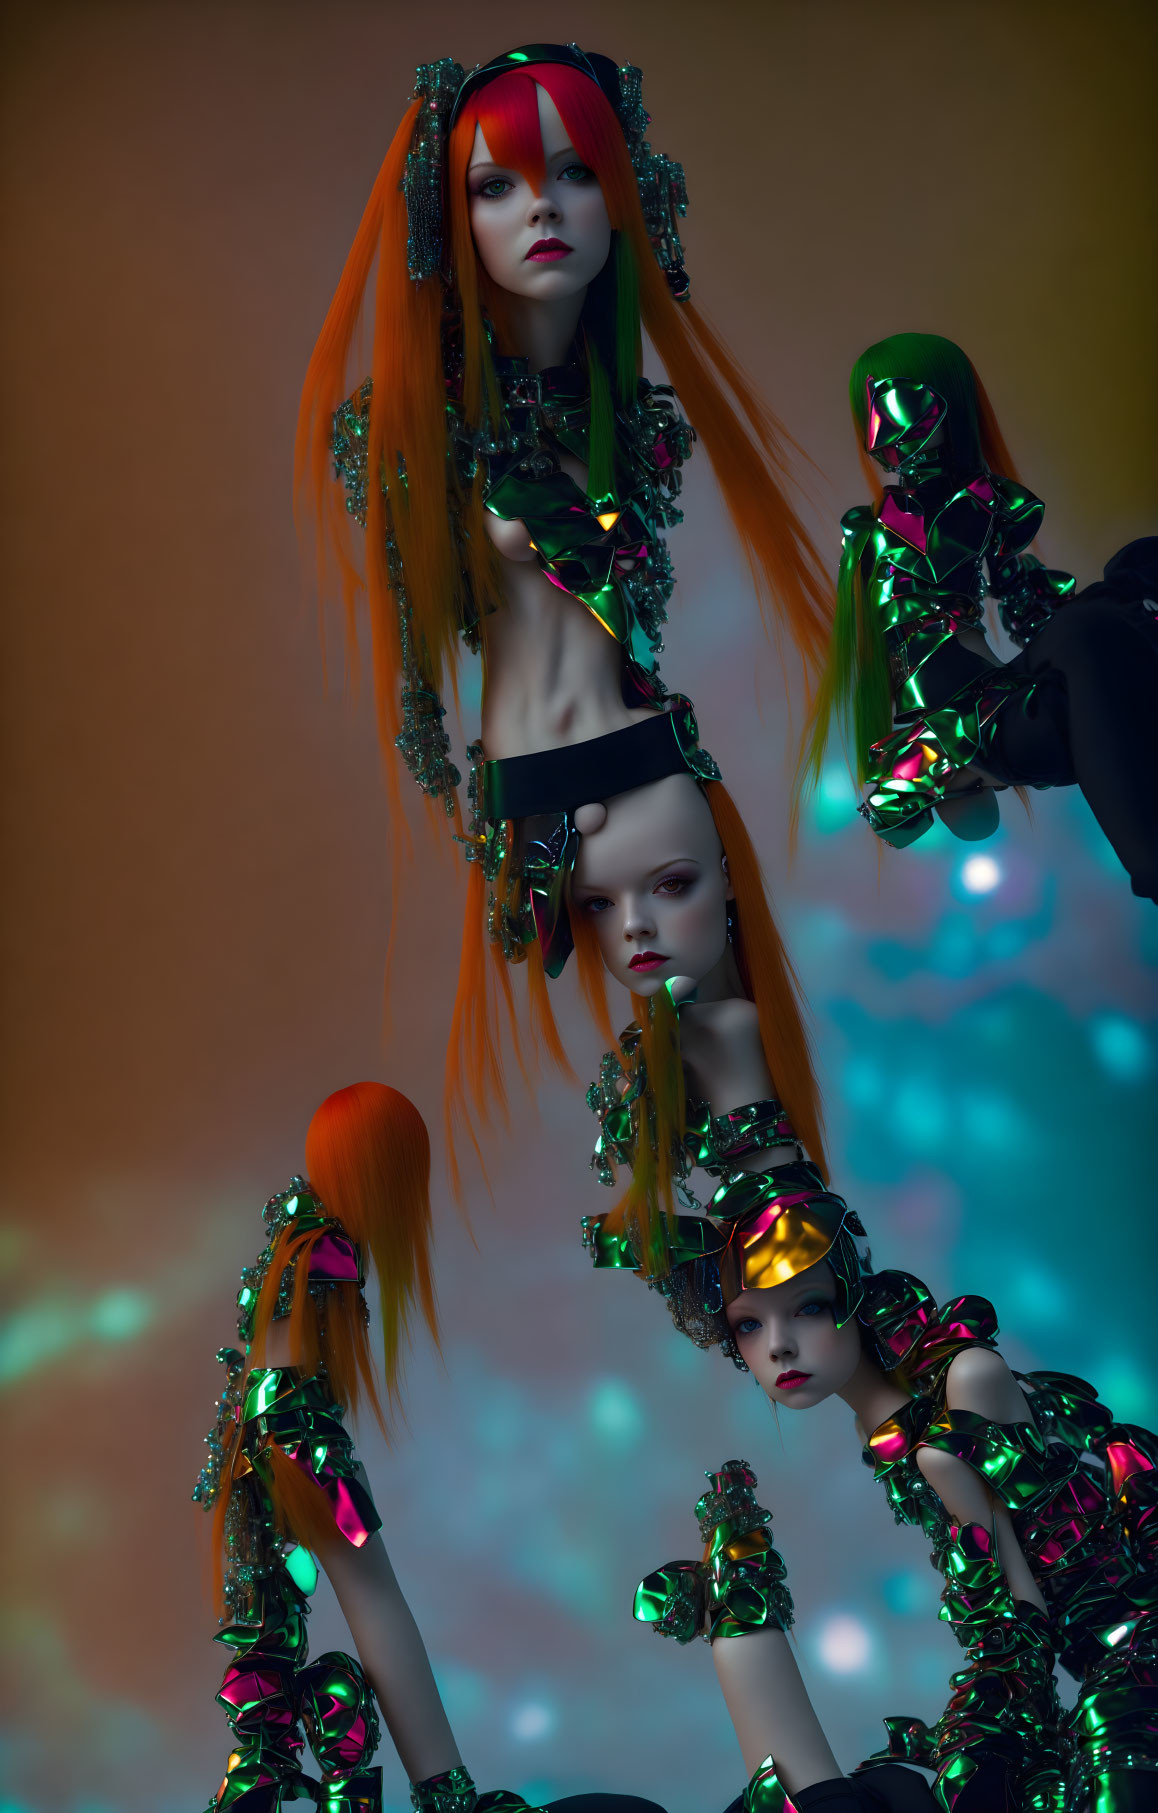 Futuristic image of models with orange hair in metallic green and black outfits